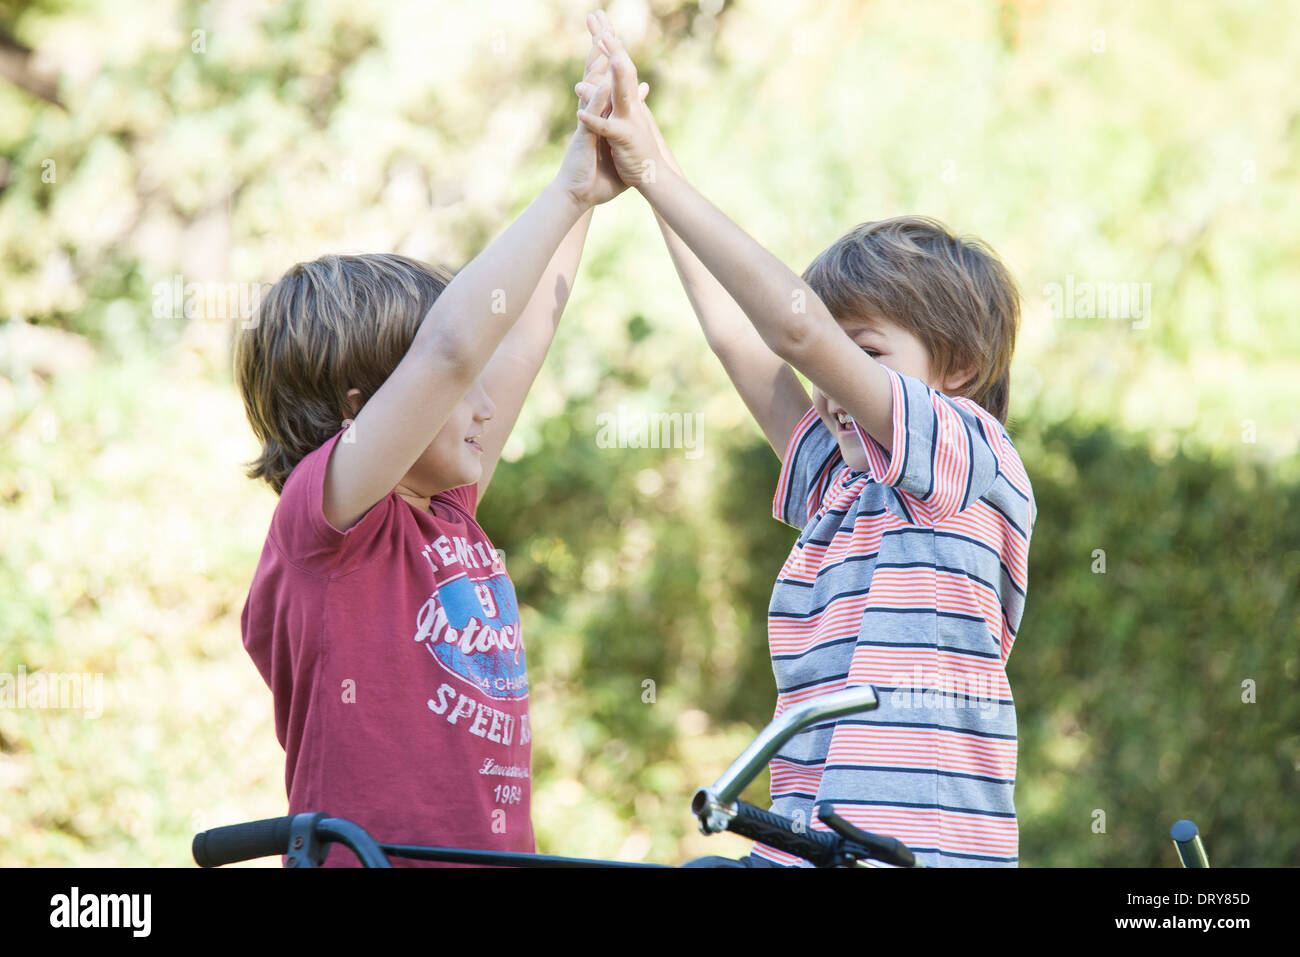 Boys on bicycles giving high fives Stock Photo